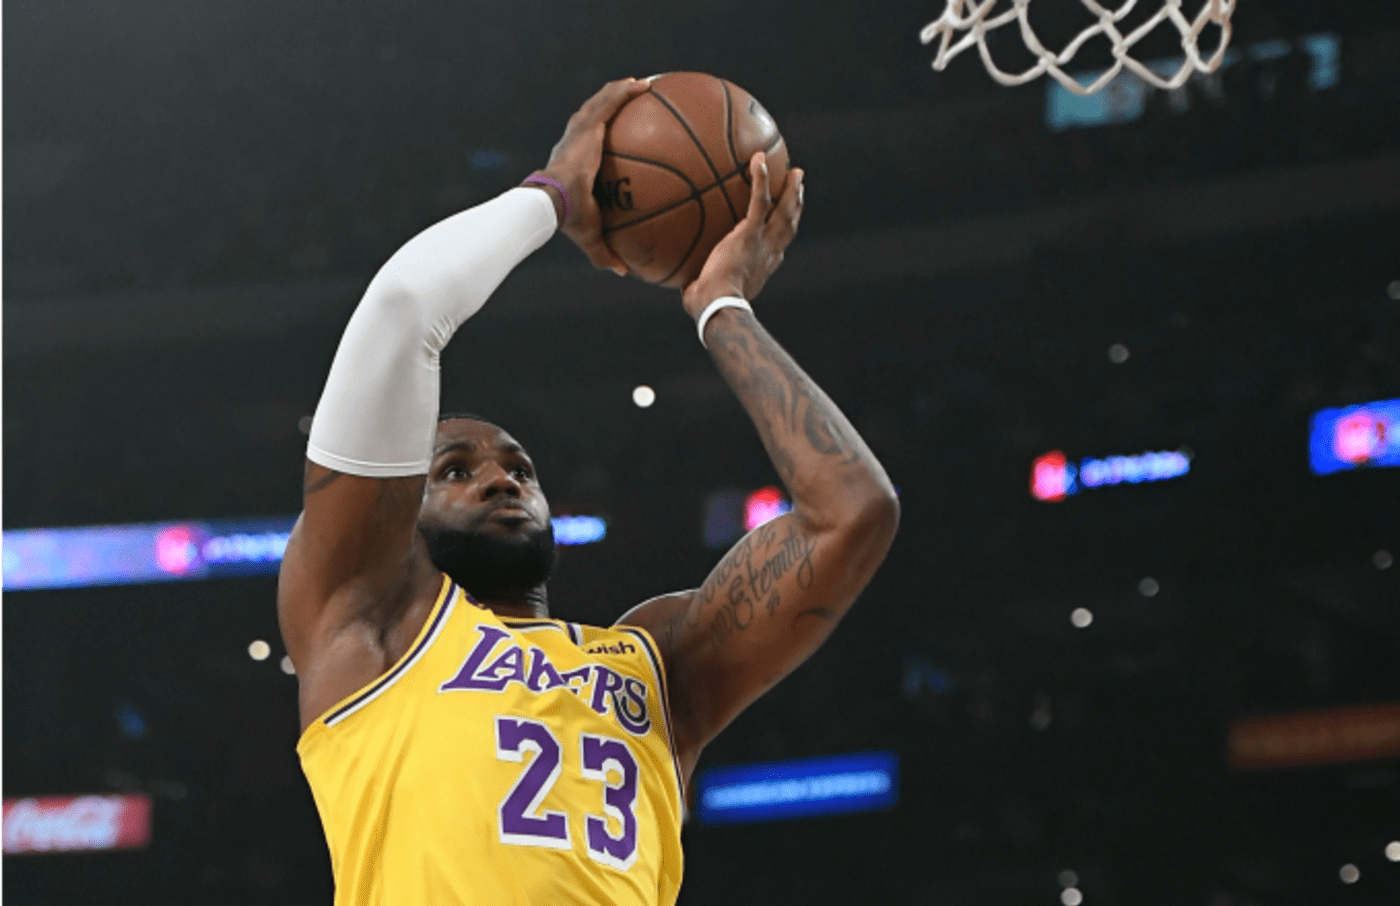 LeBron James #23 of the Los Angeles Lakers goes up for a dunk